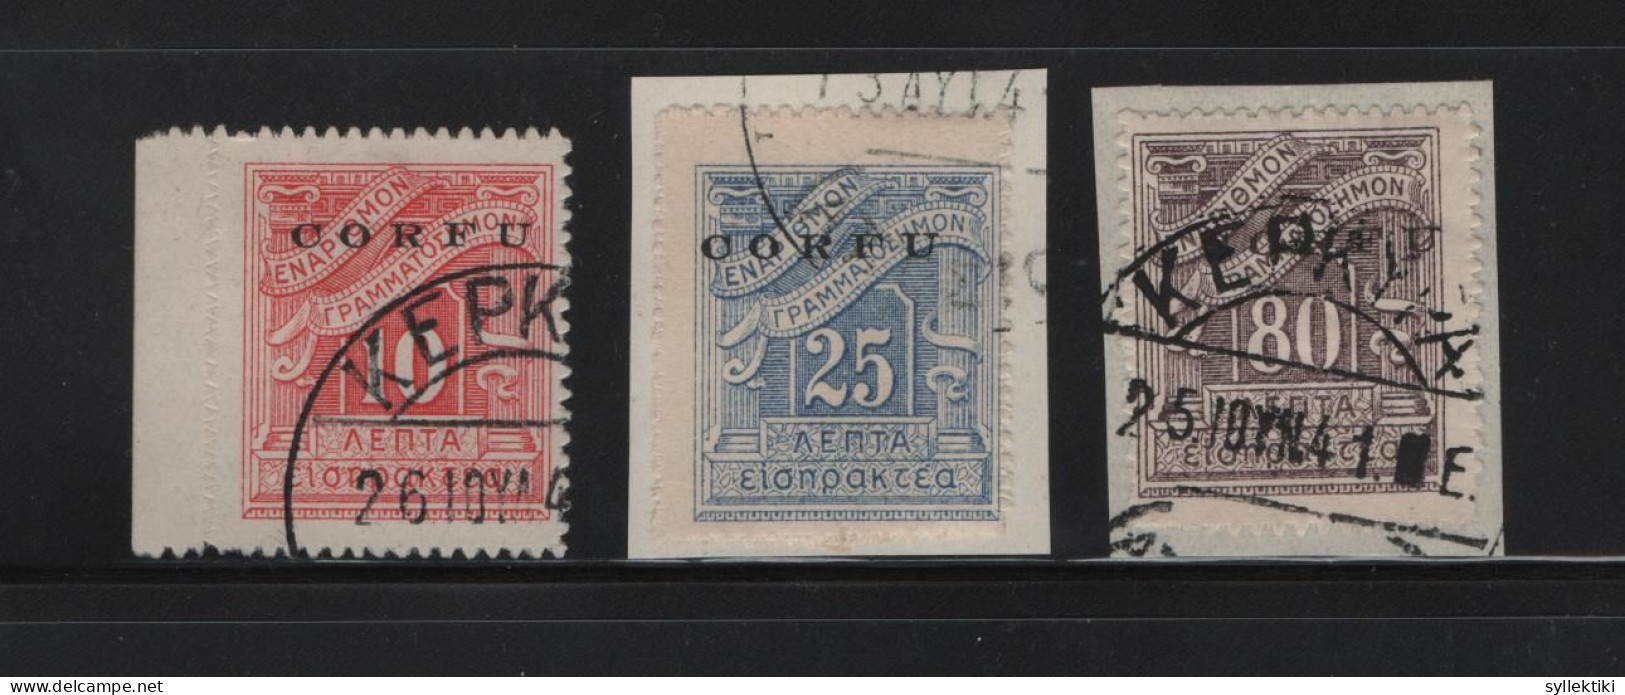 GREECE 1941 IONIAN ISLANDS OVERPRINTED CORFU ON 3 POSTAGE DUE USED STAMPS      HELLAS No 35 - 37 AND VALUE EURO 620.00 - Ionische Inseln